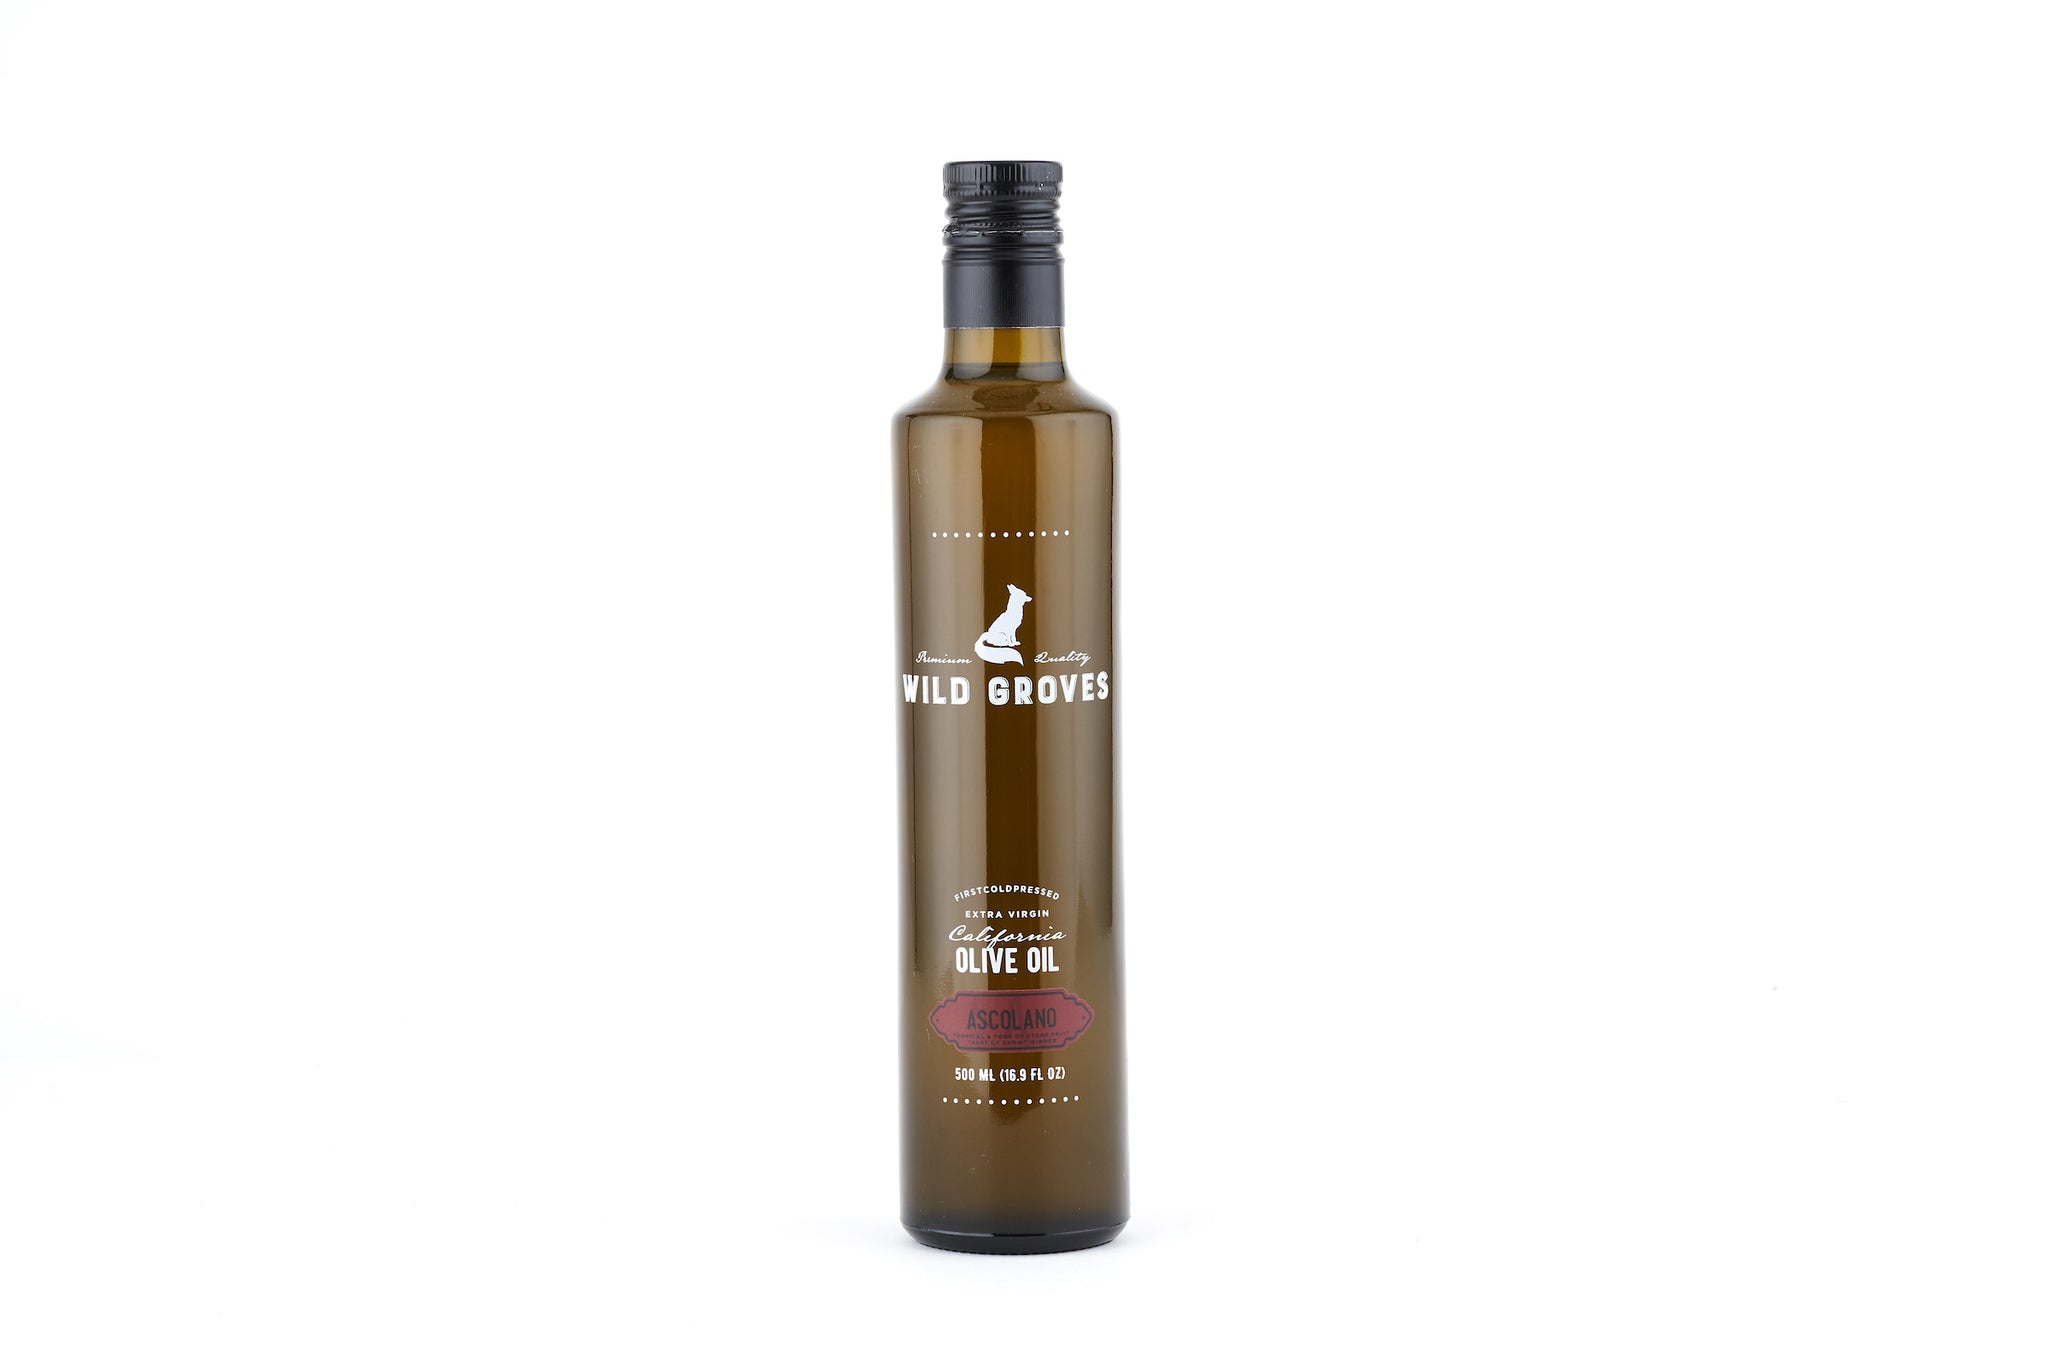 <b>Ascolano Extra Virgin Olive Oil</b><br>Fruity, Complex, Most Awarded - A Perfect Finishing Oil